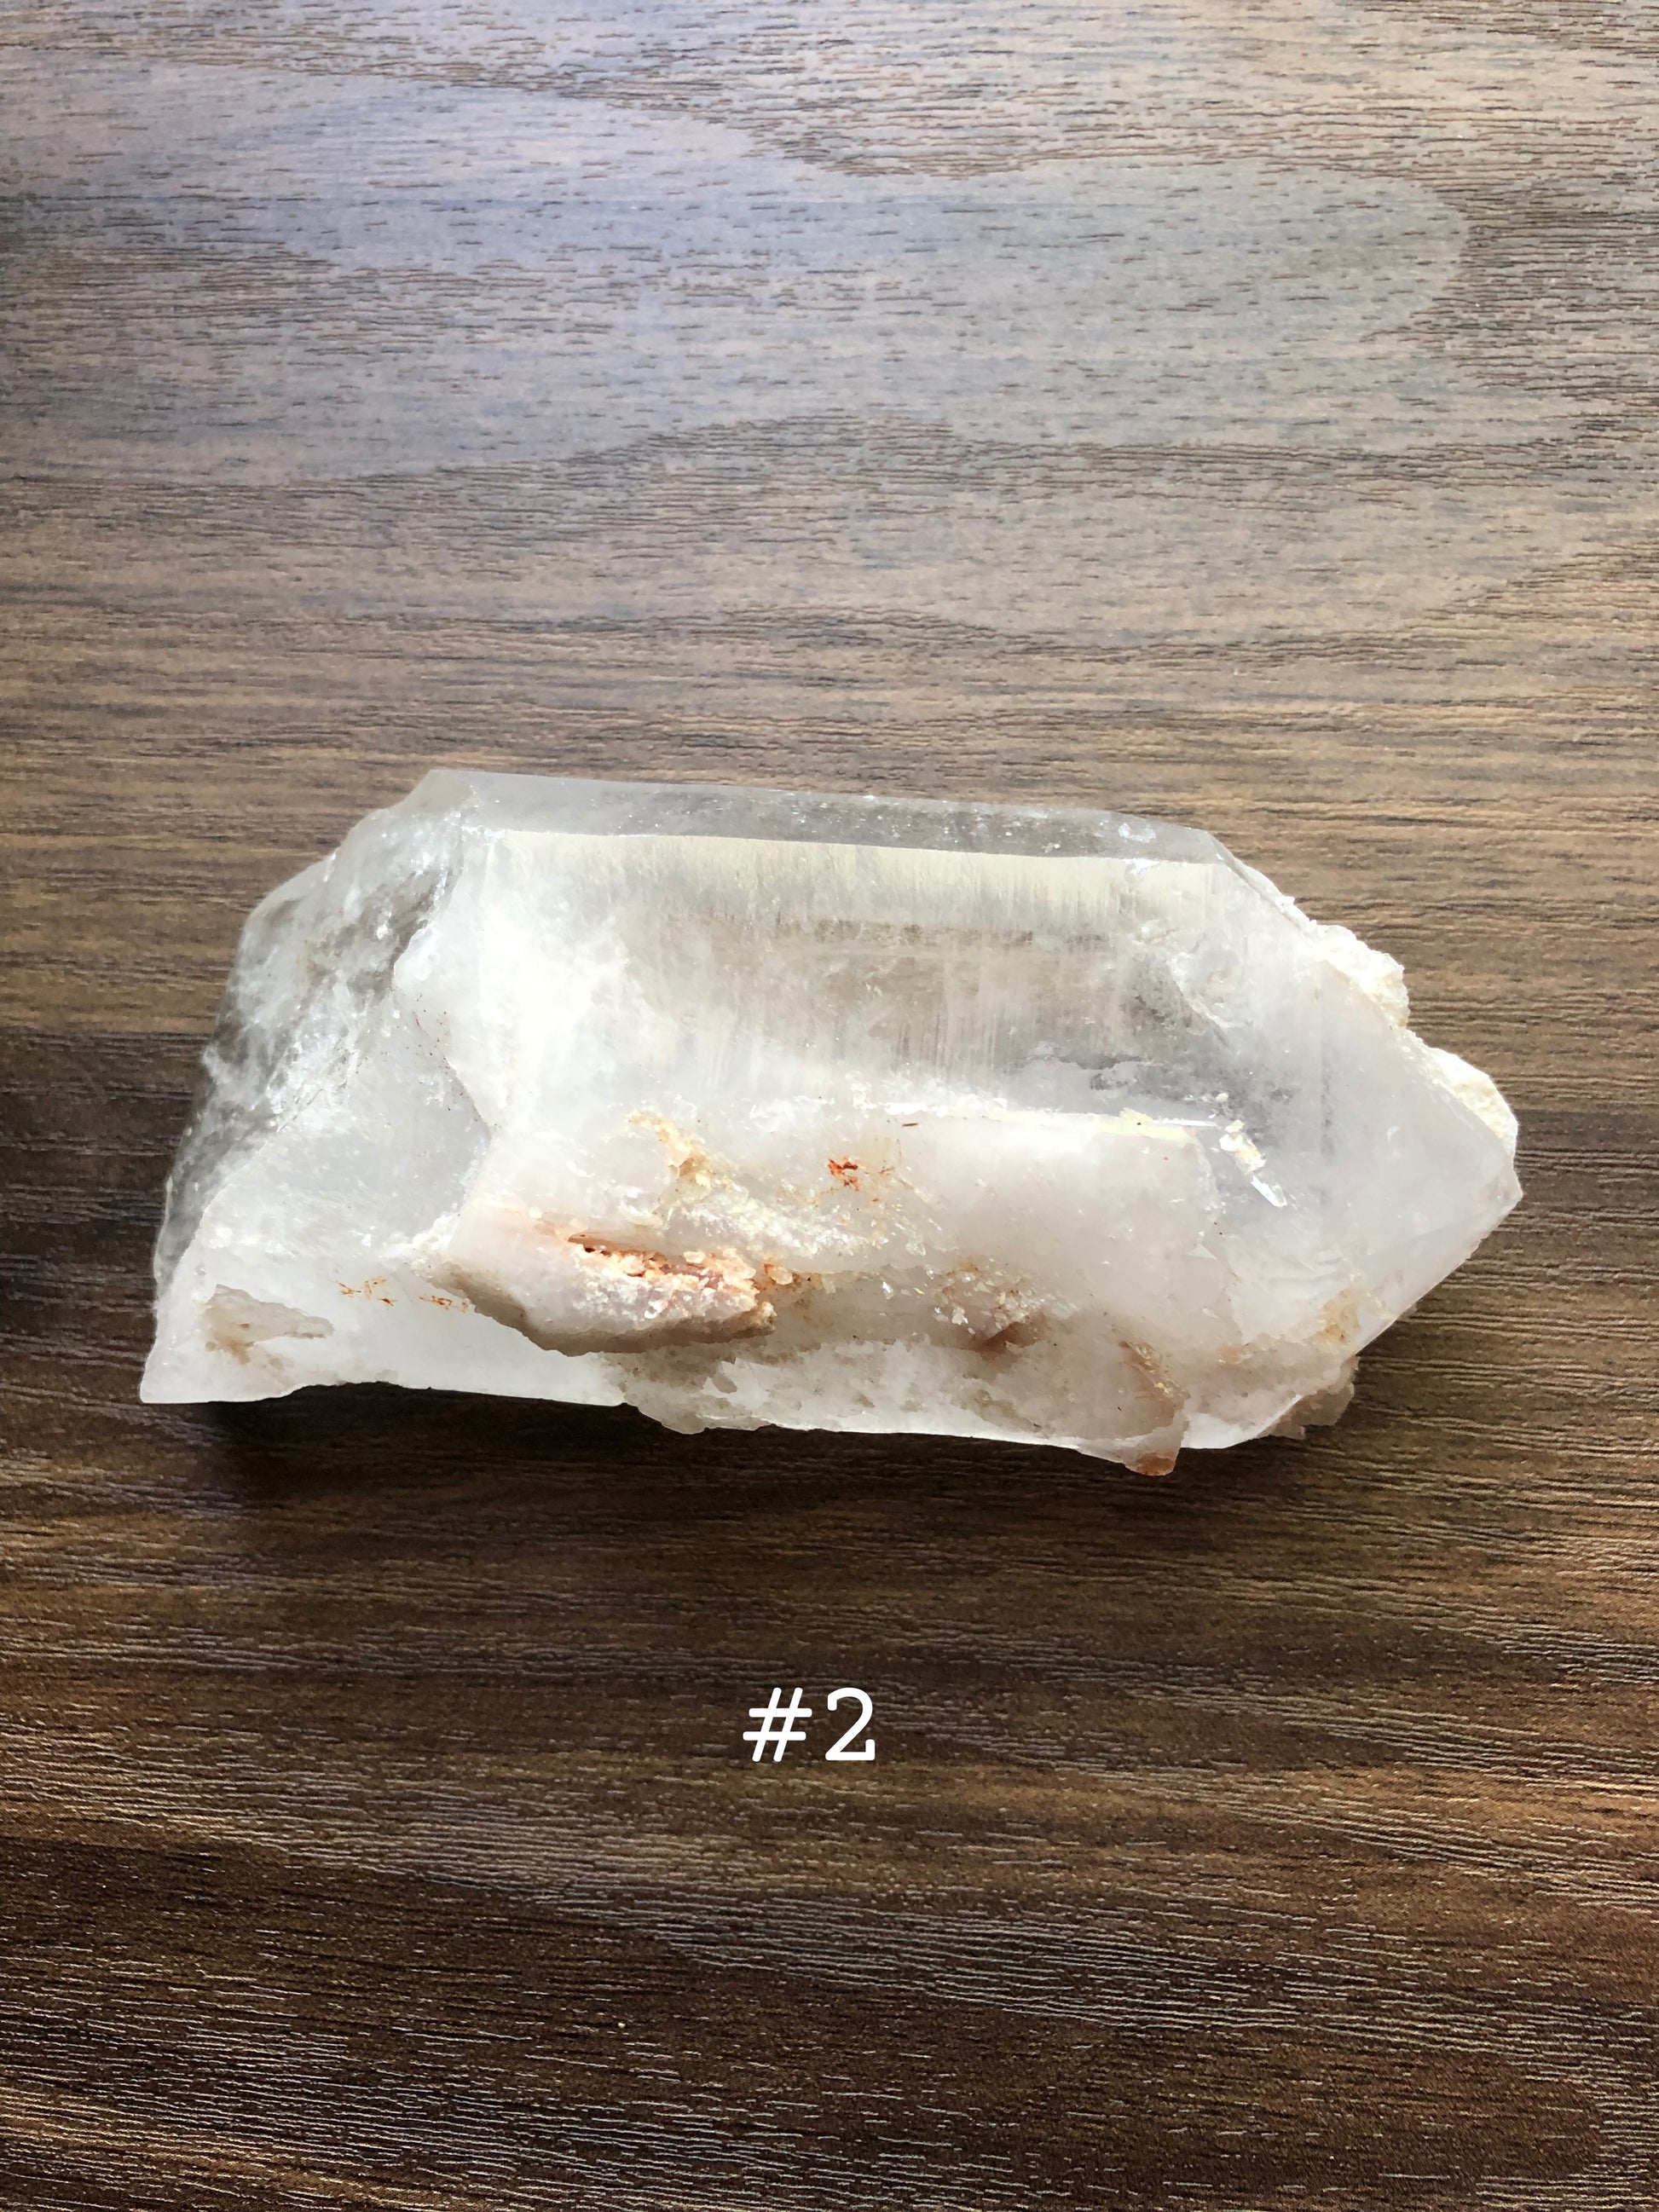 A large, rough cut quartz crystal rests on a wooden surface. It is jagged in shape. The crystal is relatively clear, with a portion of it being slightly discolored. The number 2 is shown on the picture.